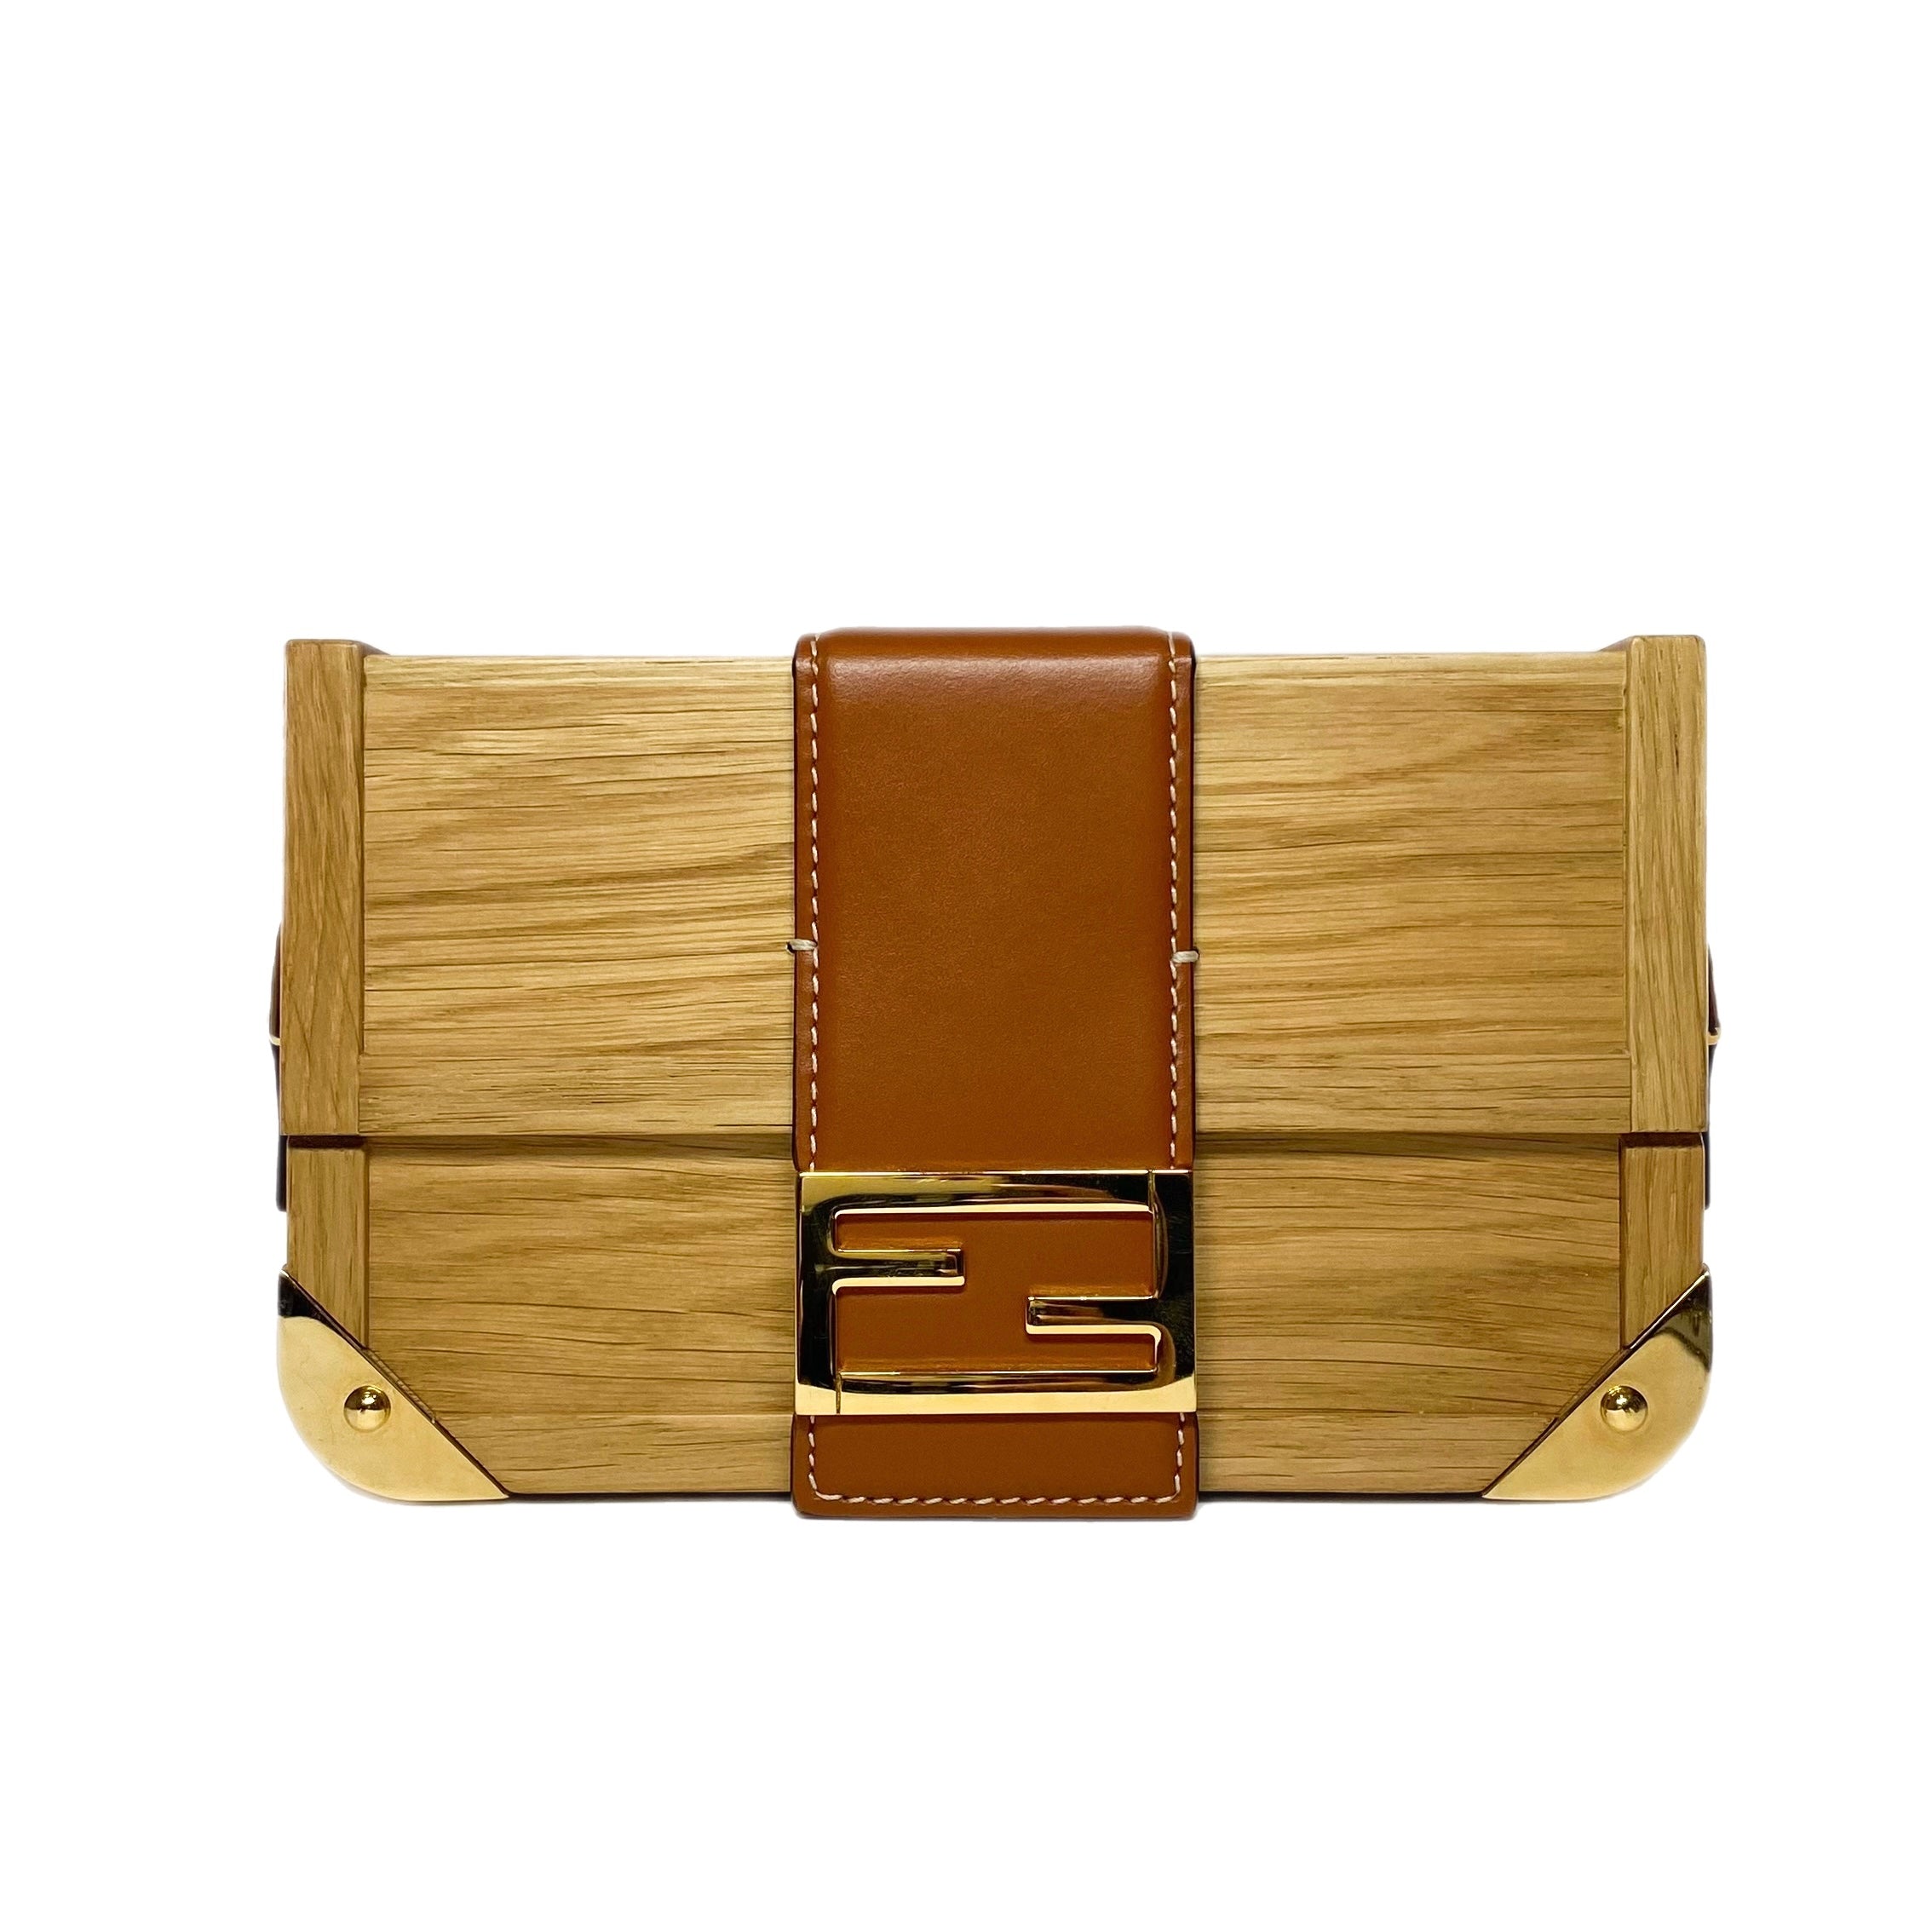 Fendi's Baguette Bag Is A Classic — Here's What You Need To Know